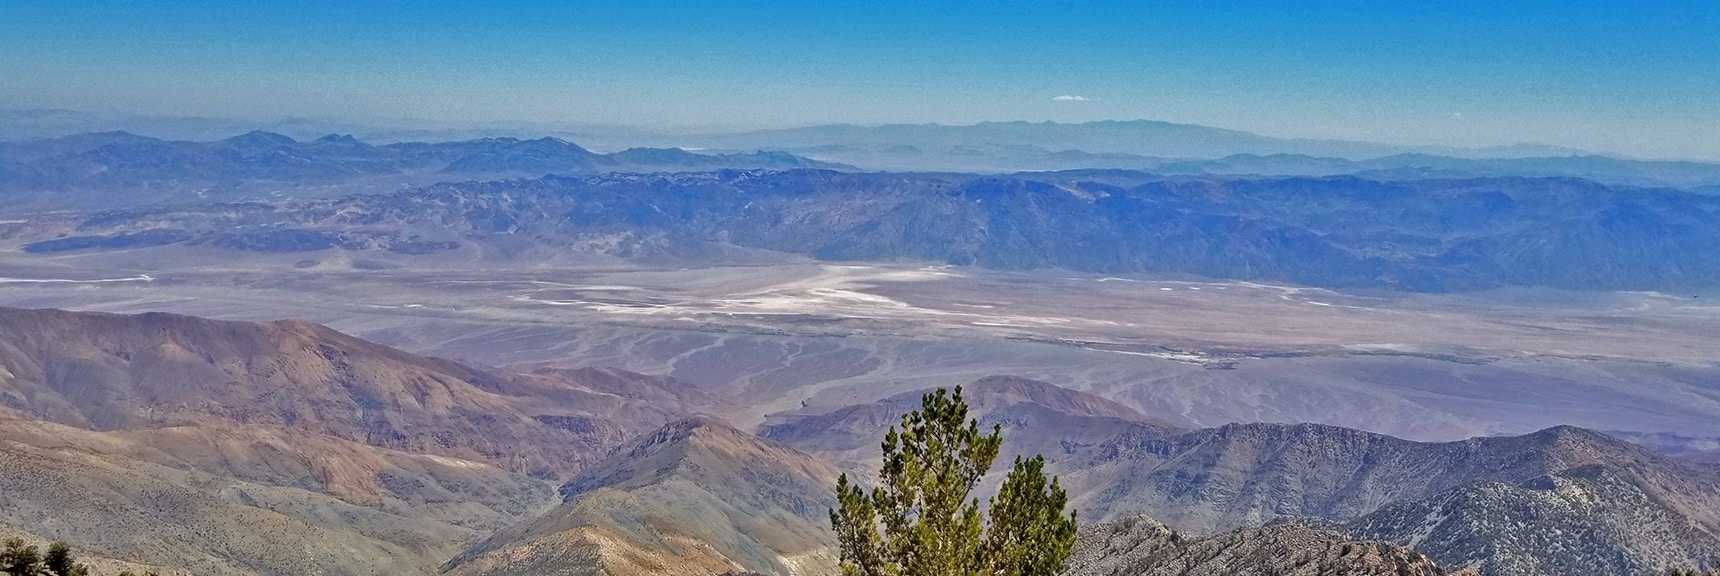 View Straight Down to Badwater Basin in Center, Mt. Charleston Wilderness Faintly in Horizon High Point | Telescope Peak Summit from Wildrose Charcoal Kilns Parking Area, Panamint Mountains, Death Valley National Park, California